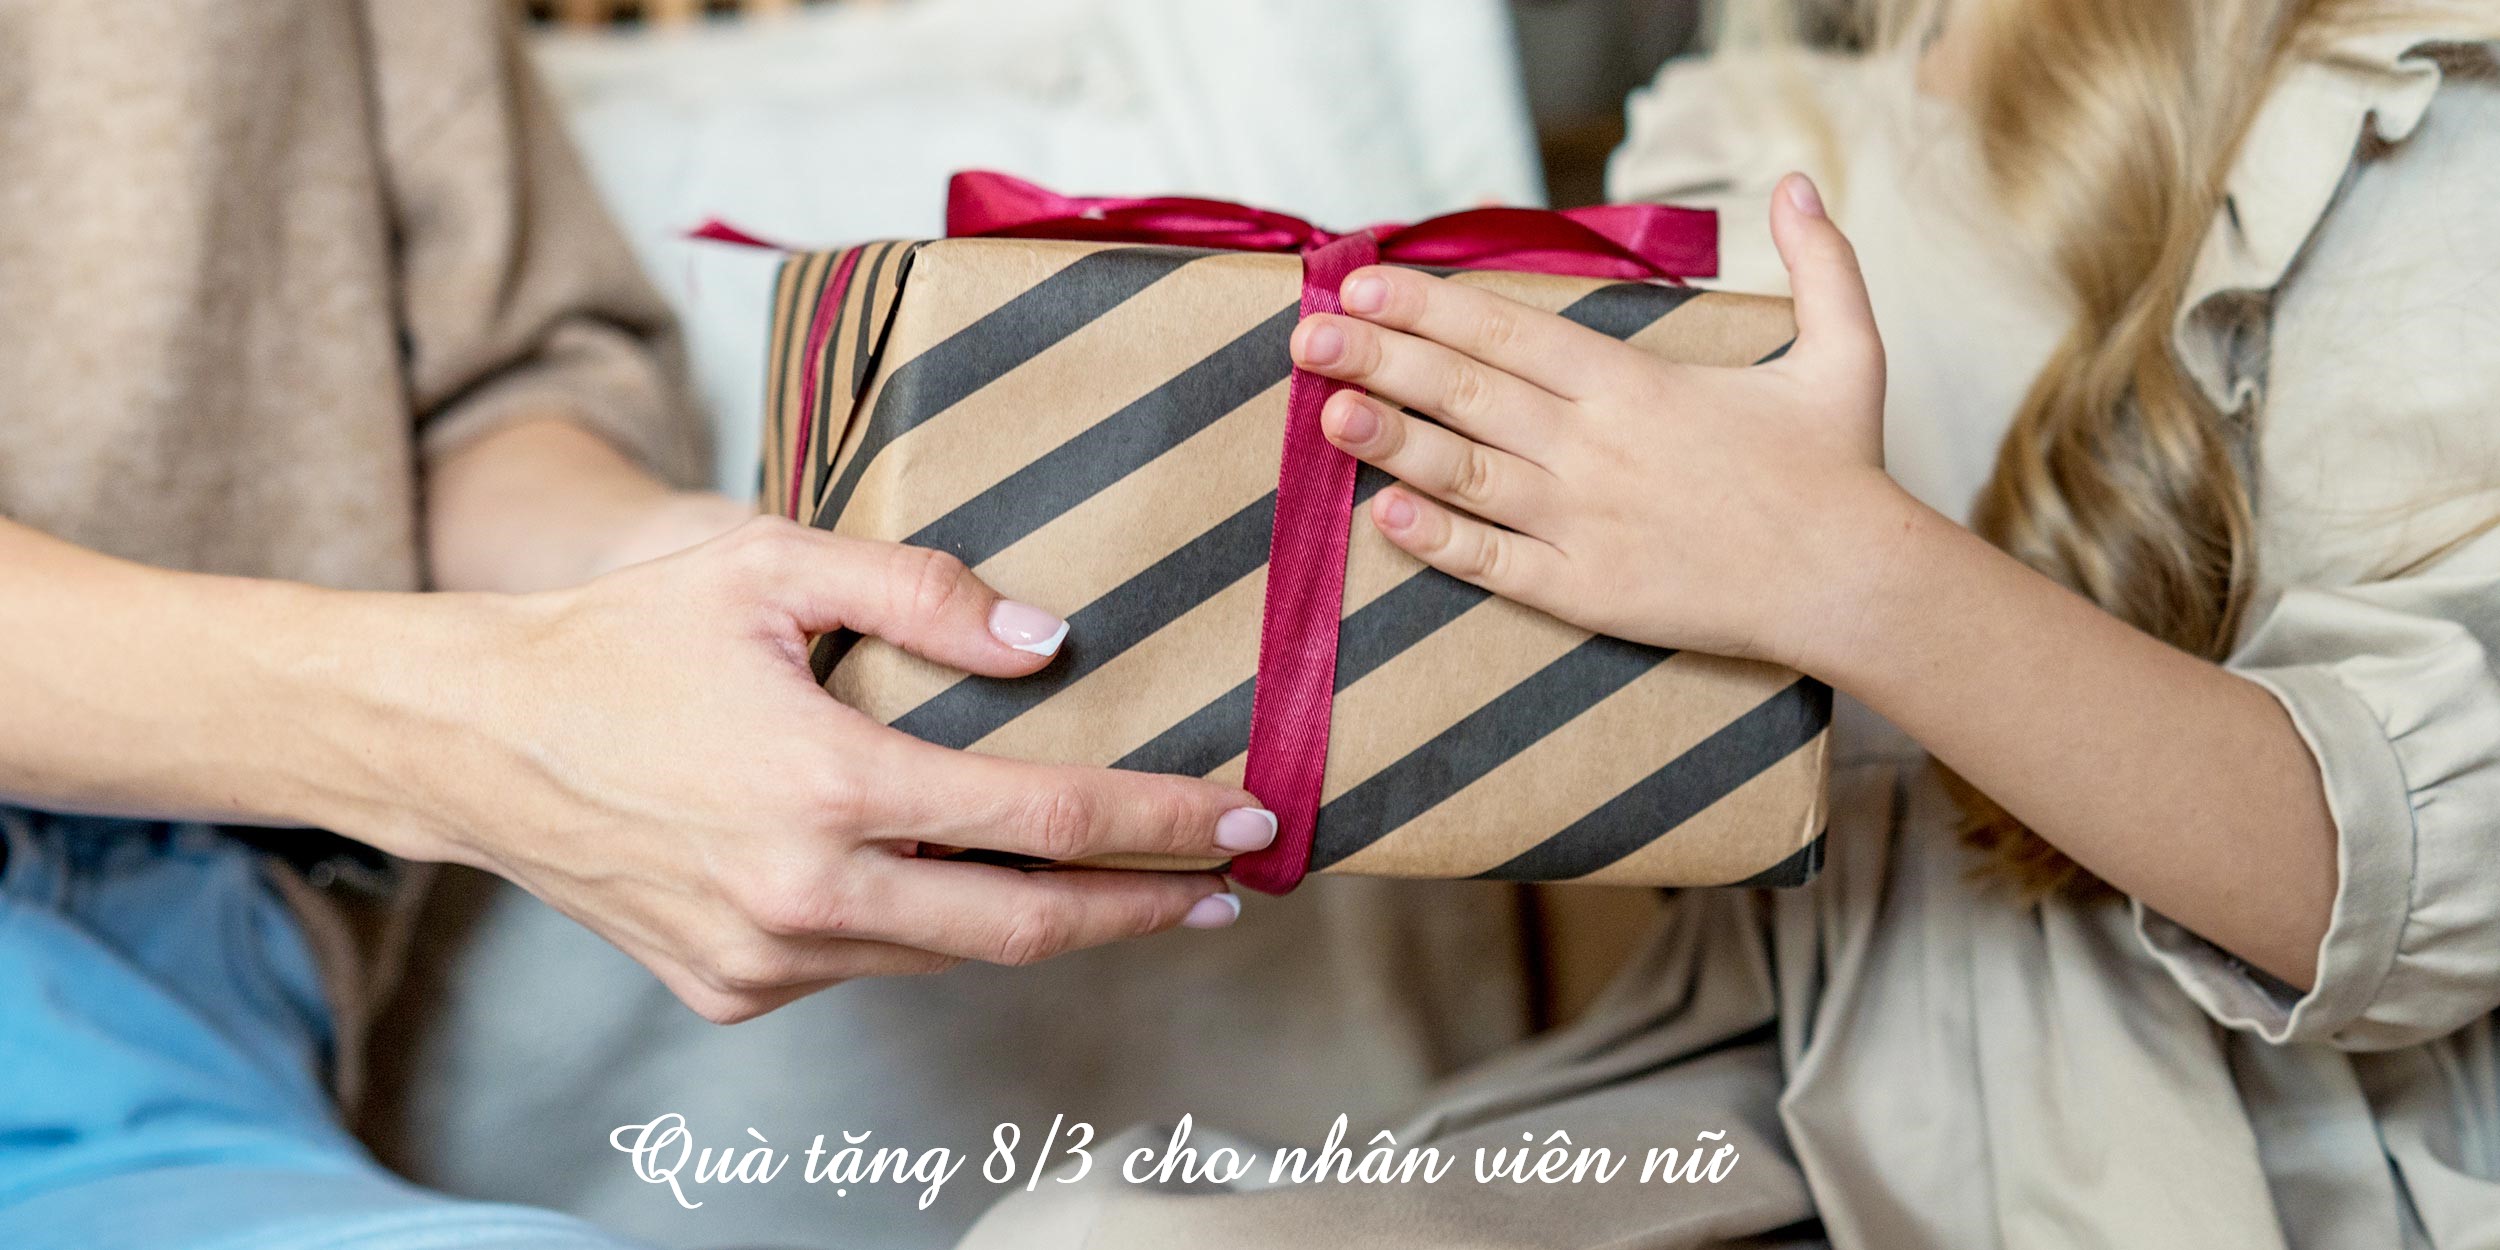 Top 5 Gifts 8 3 For Female Employees Of The Business